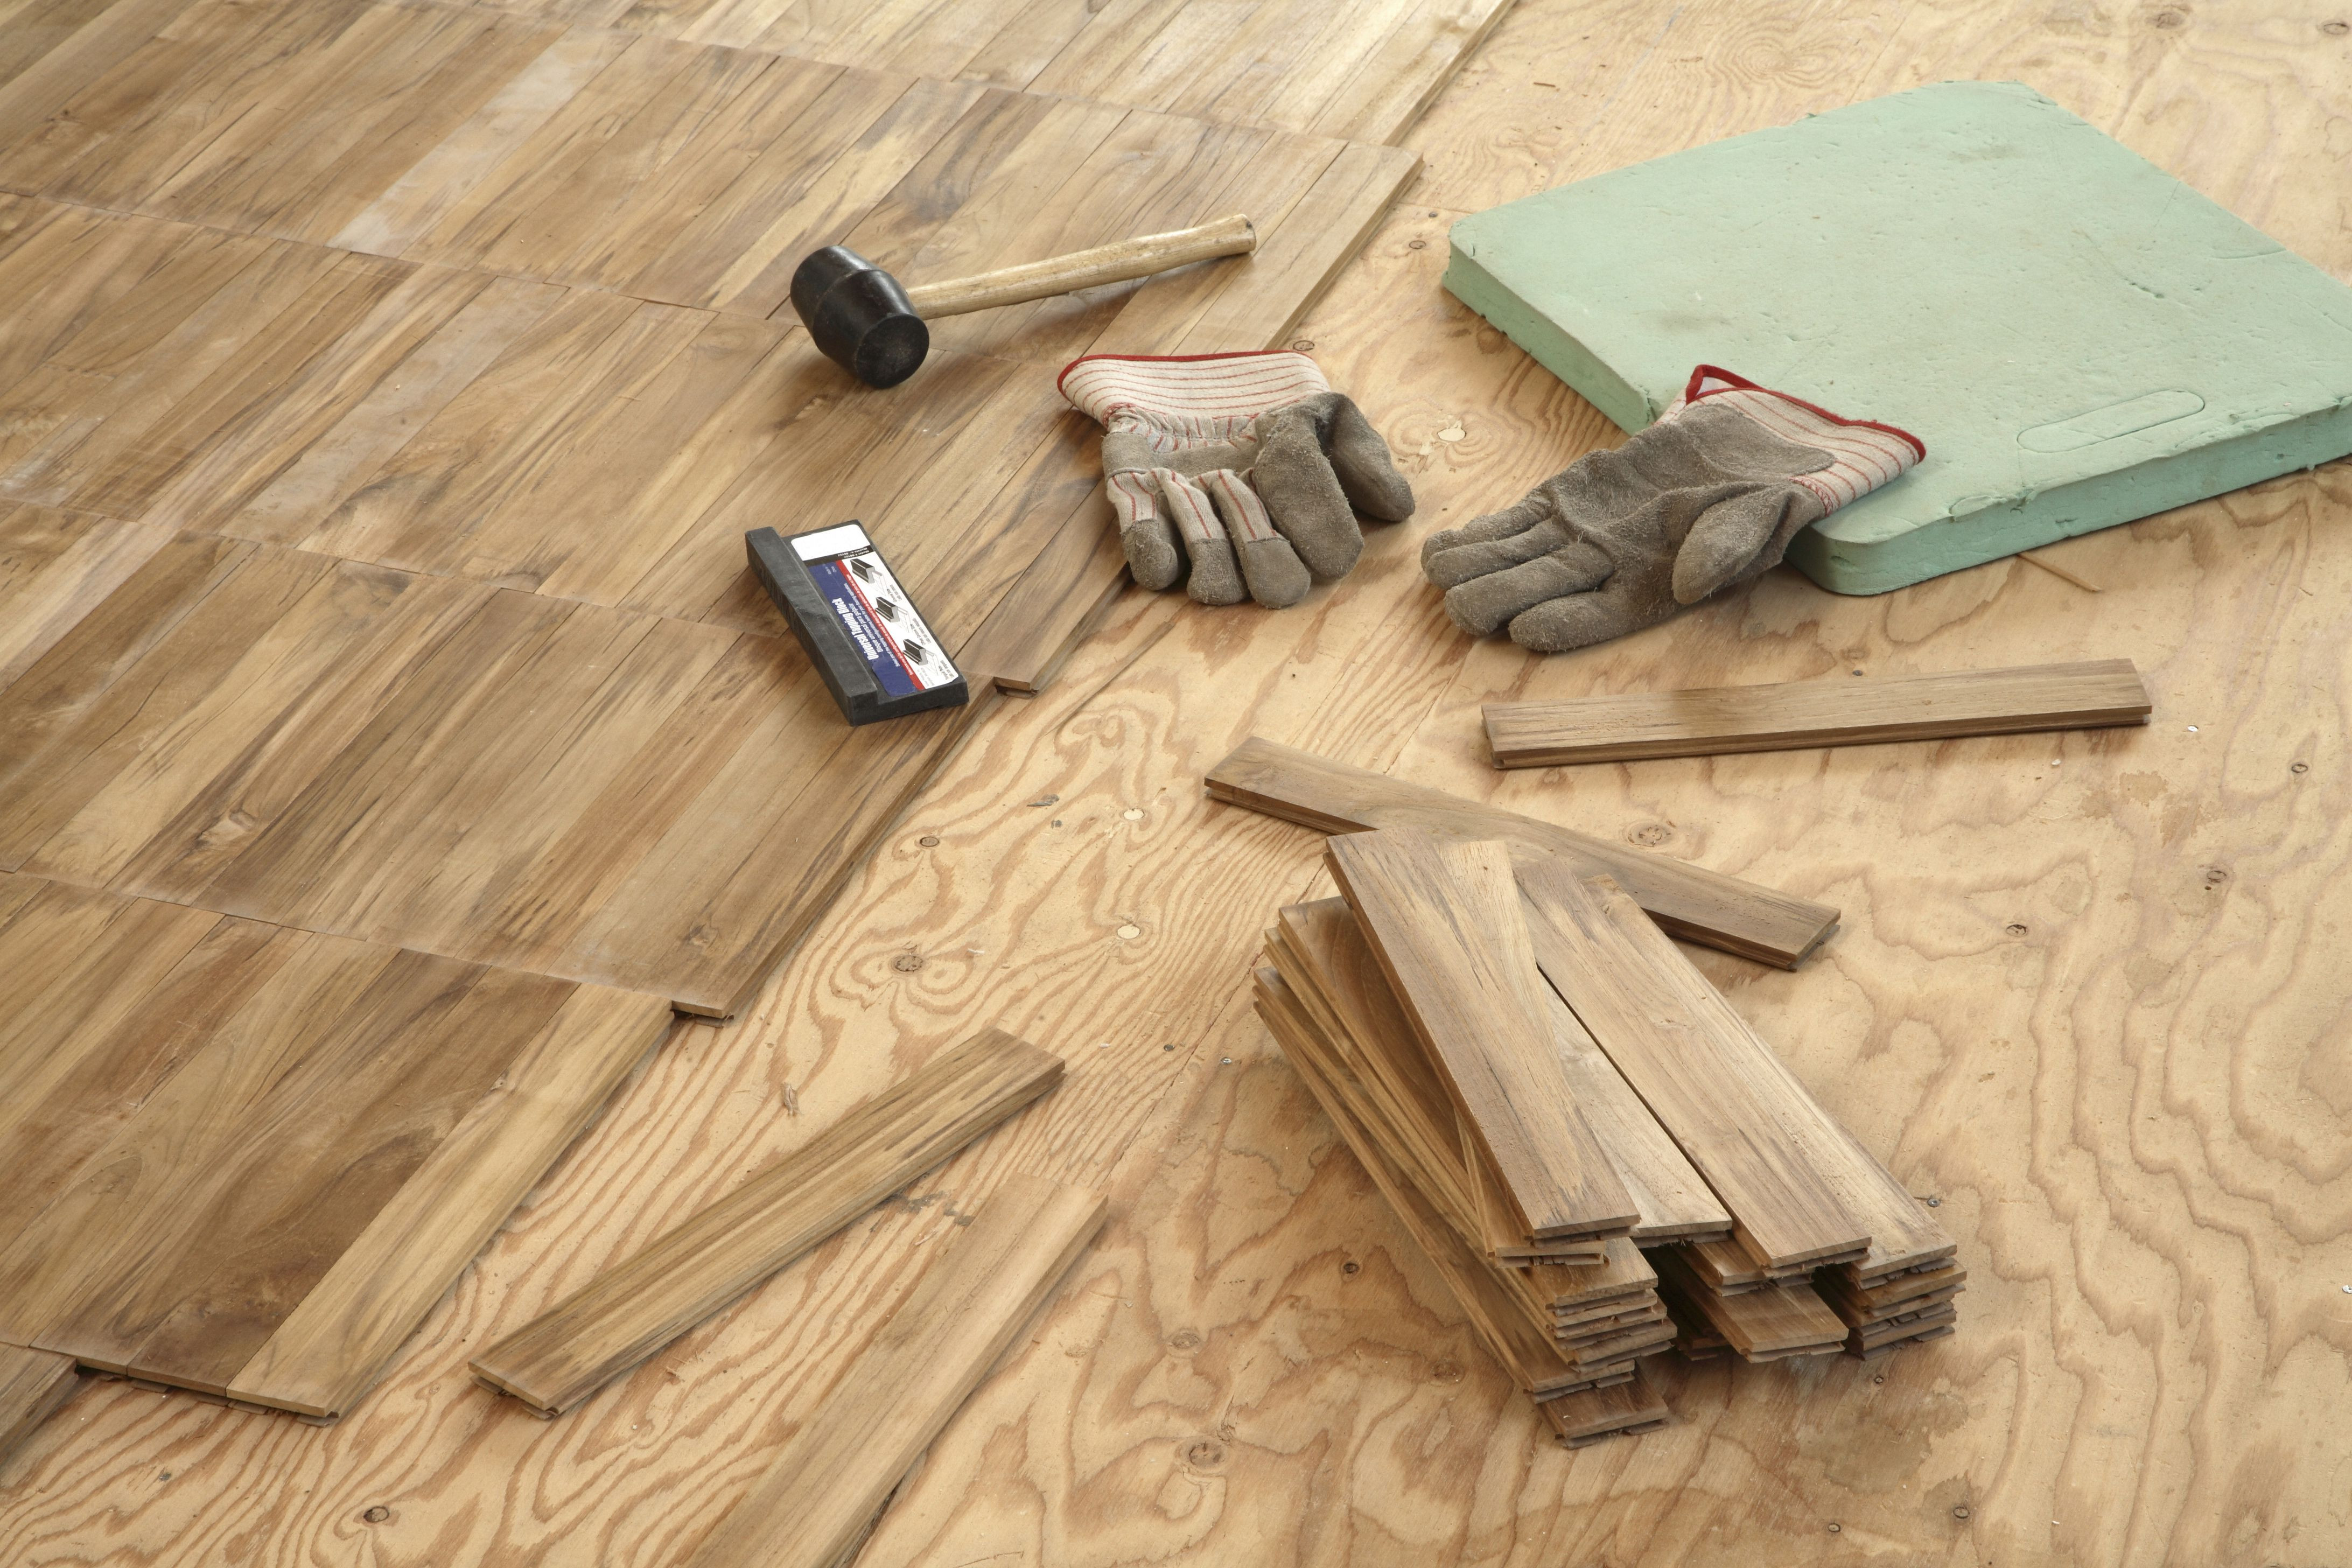 20 Popular Hardwood Floor Refinishing Bowling Green Ky 2024 free download hardwood floor refinishing bowling green ky of plywood underlayment pros and cons types and brands pertaining to plywoodunderlaymentunderwoodflooring 5ac24fbcae9ab8003781af25